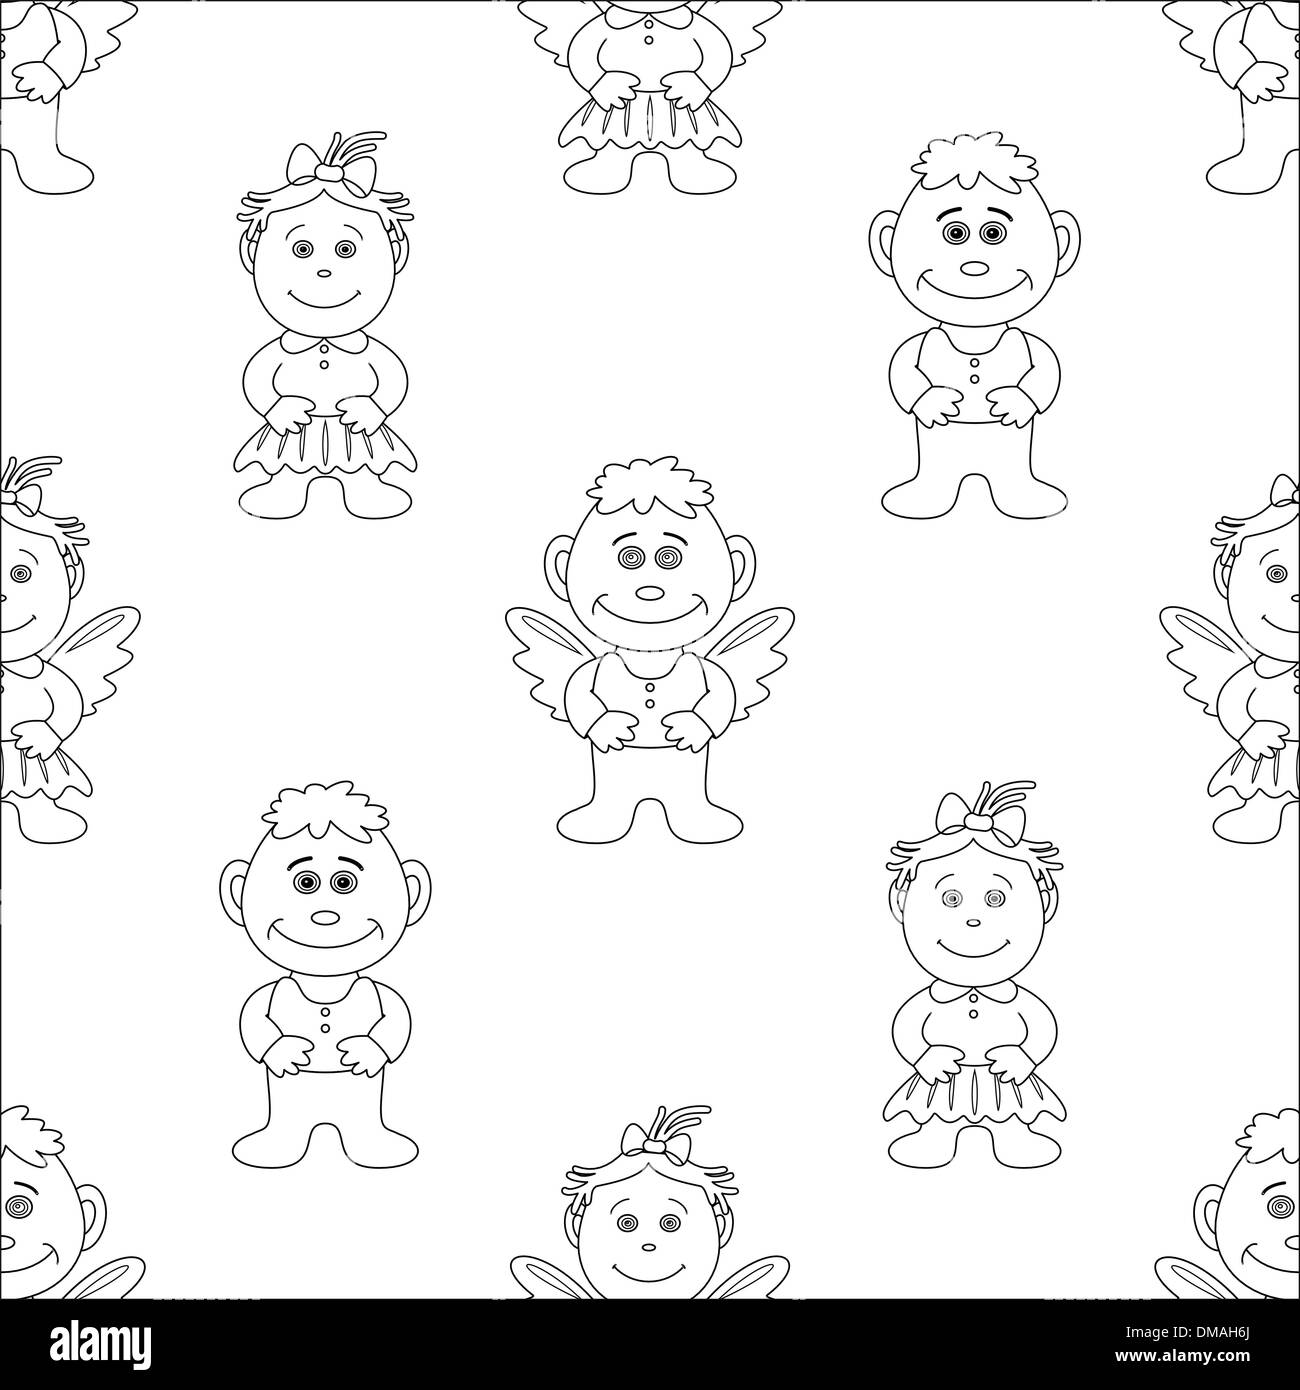 Boy and girl angels, contours Stock Vector